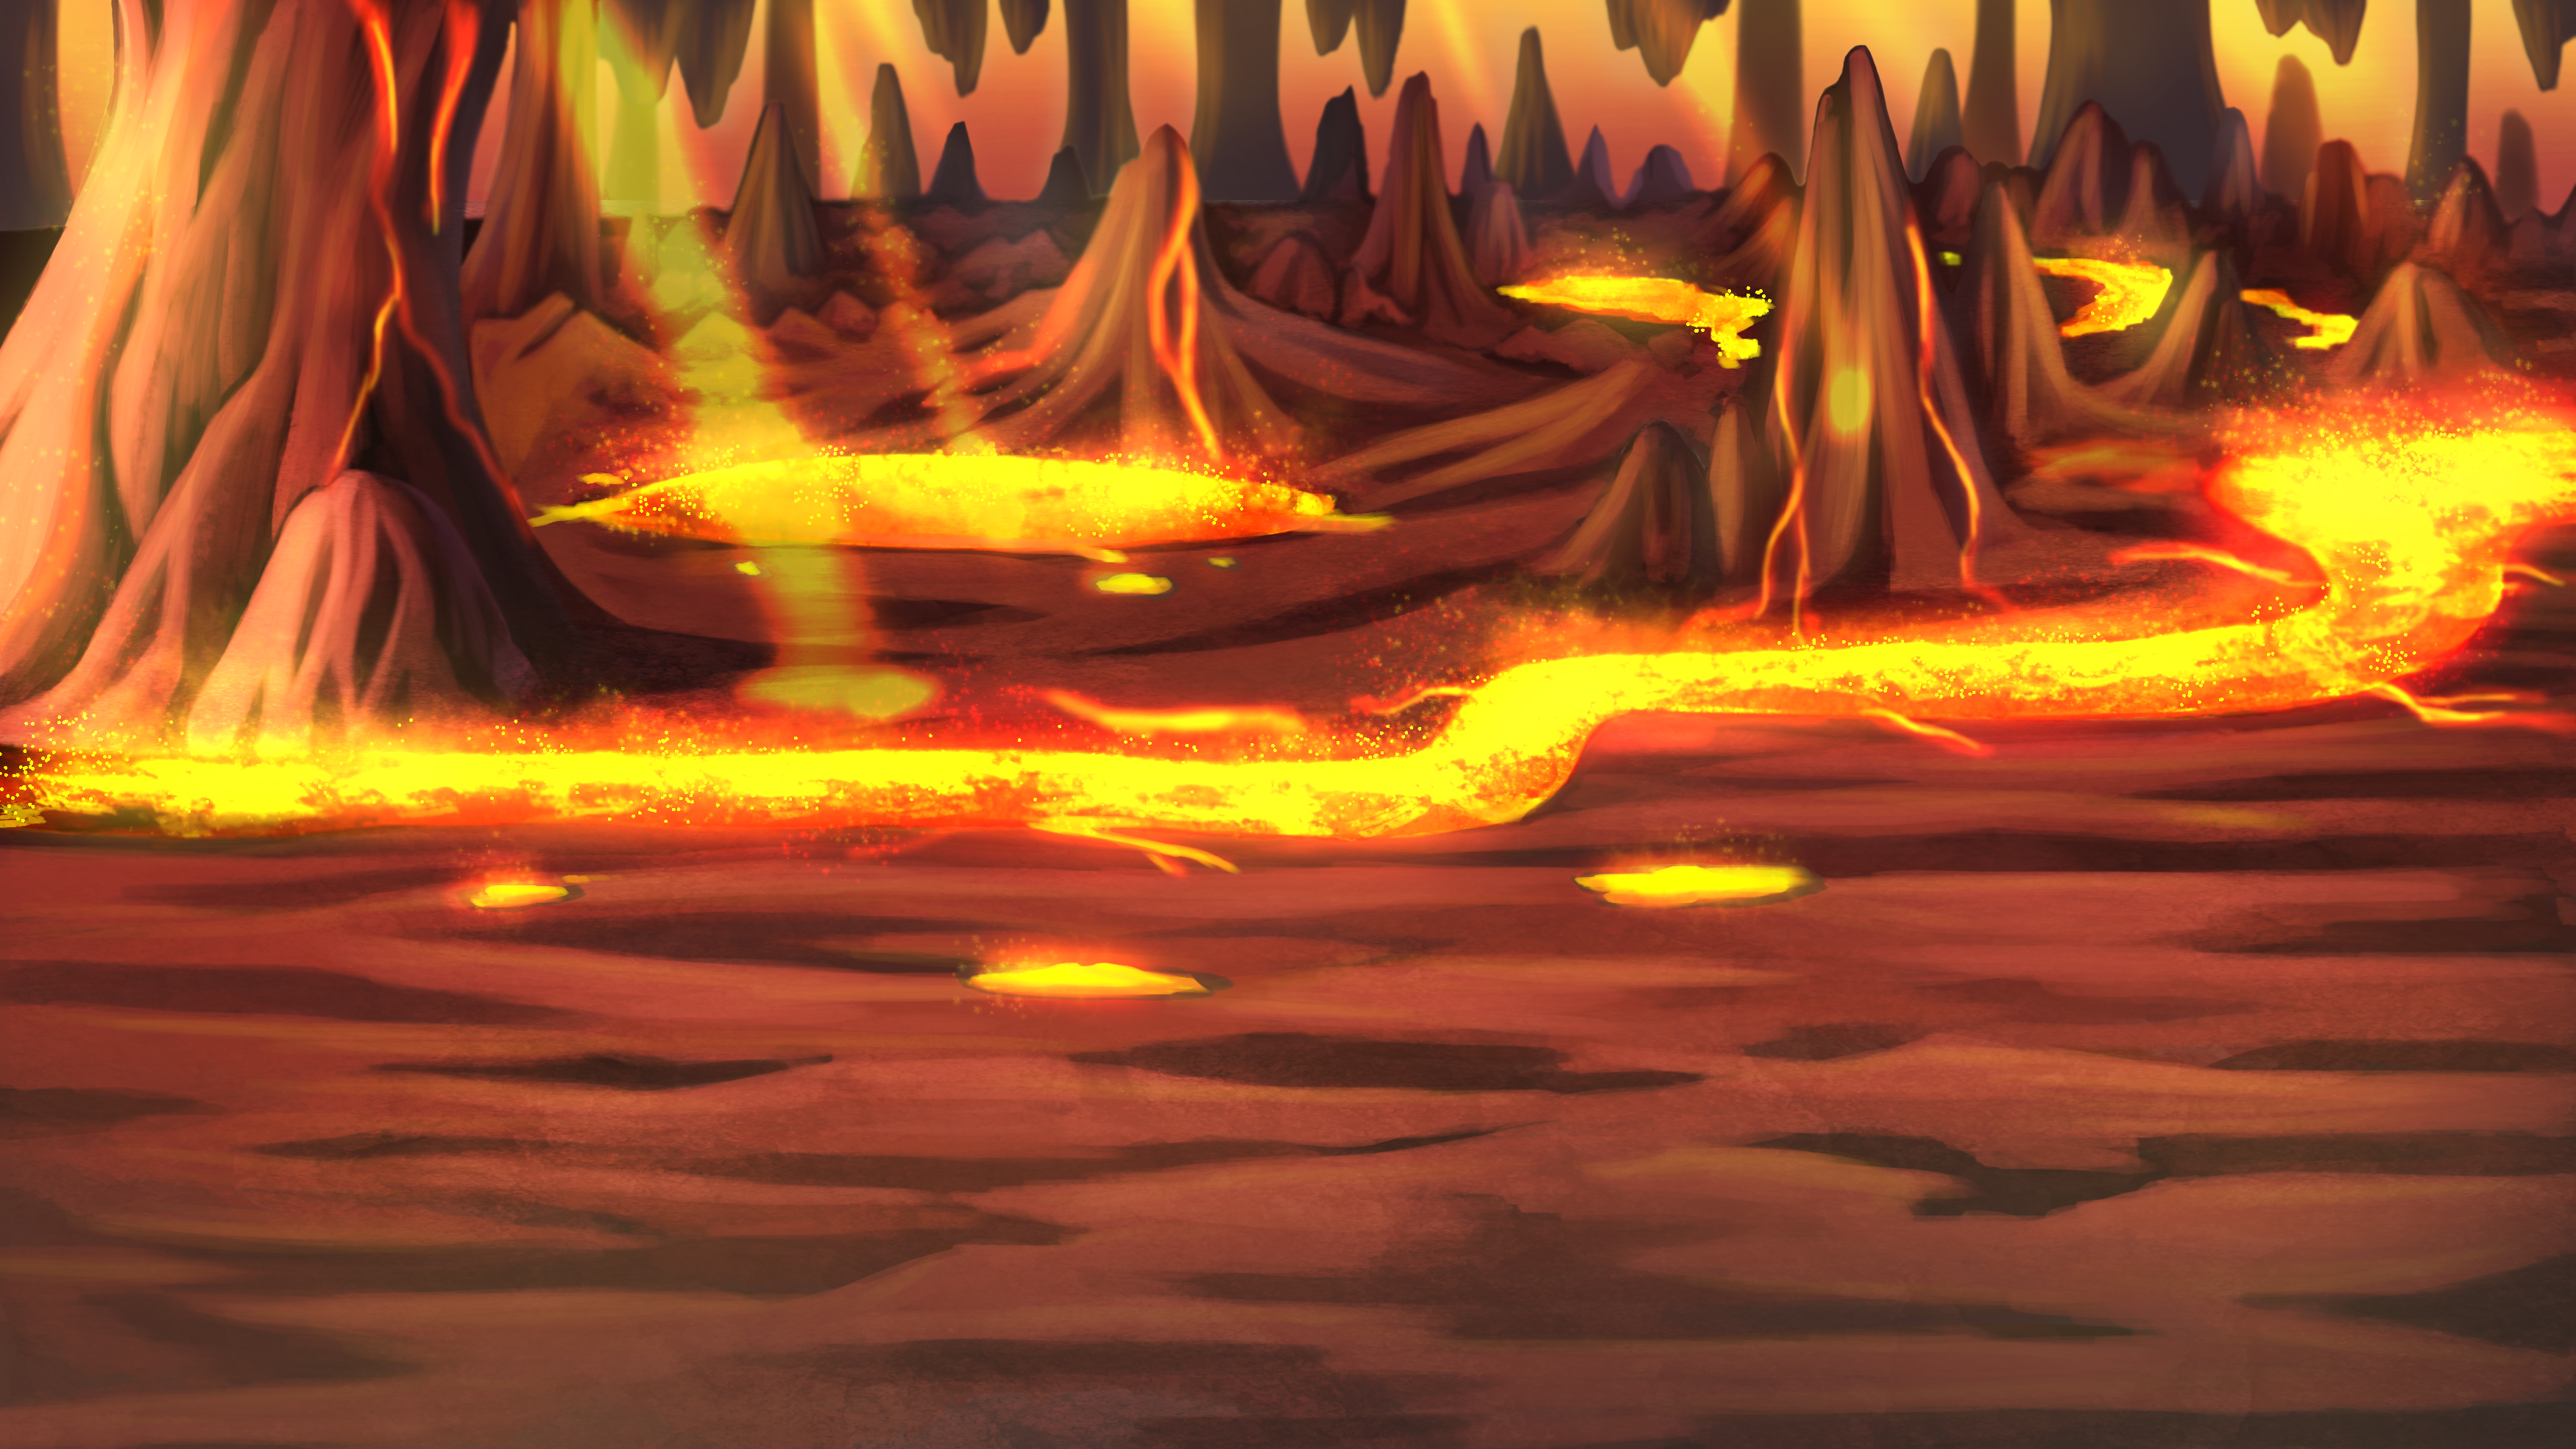 Fire Rpg background | OpenGameArt.org